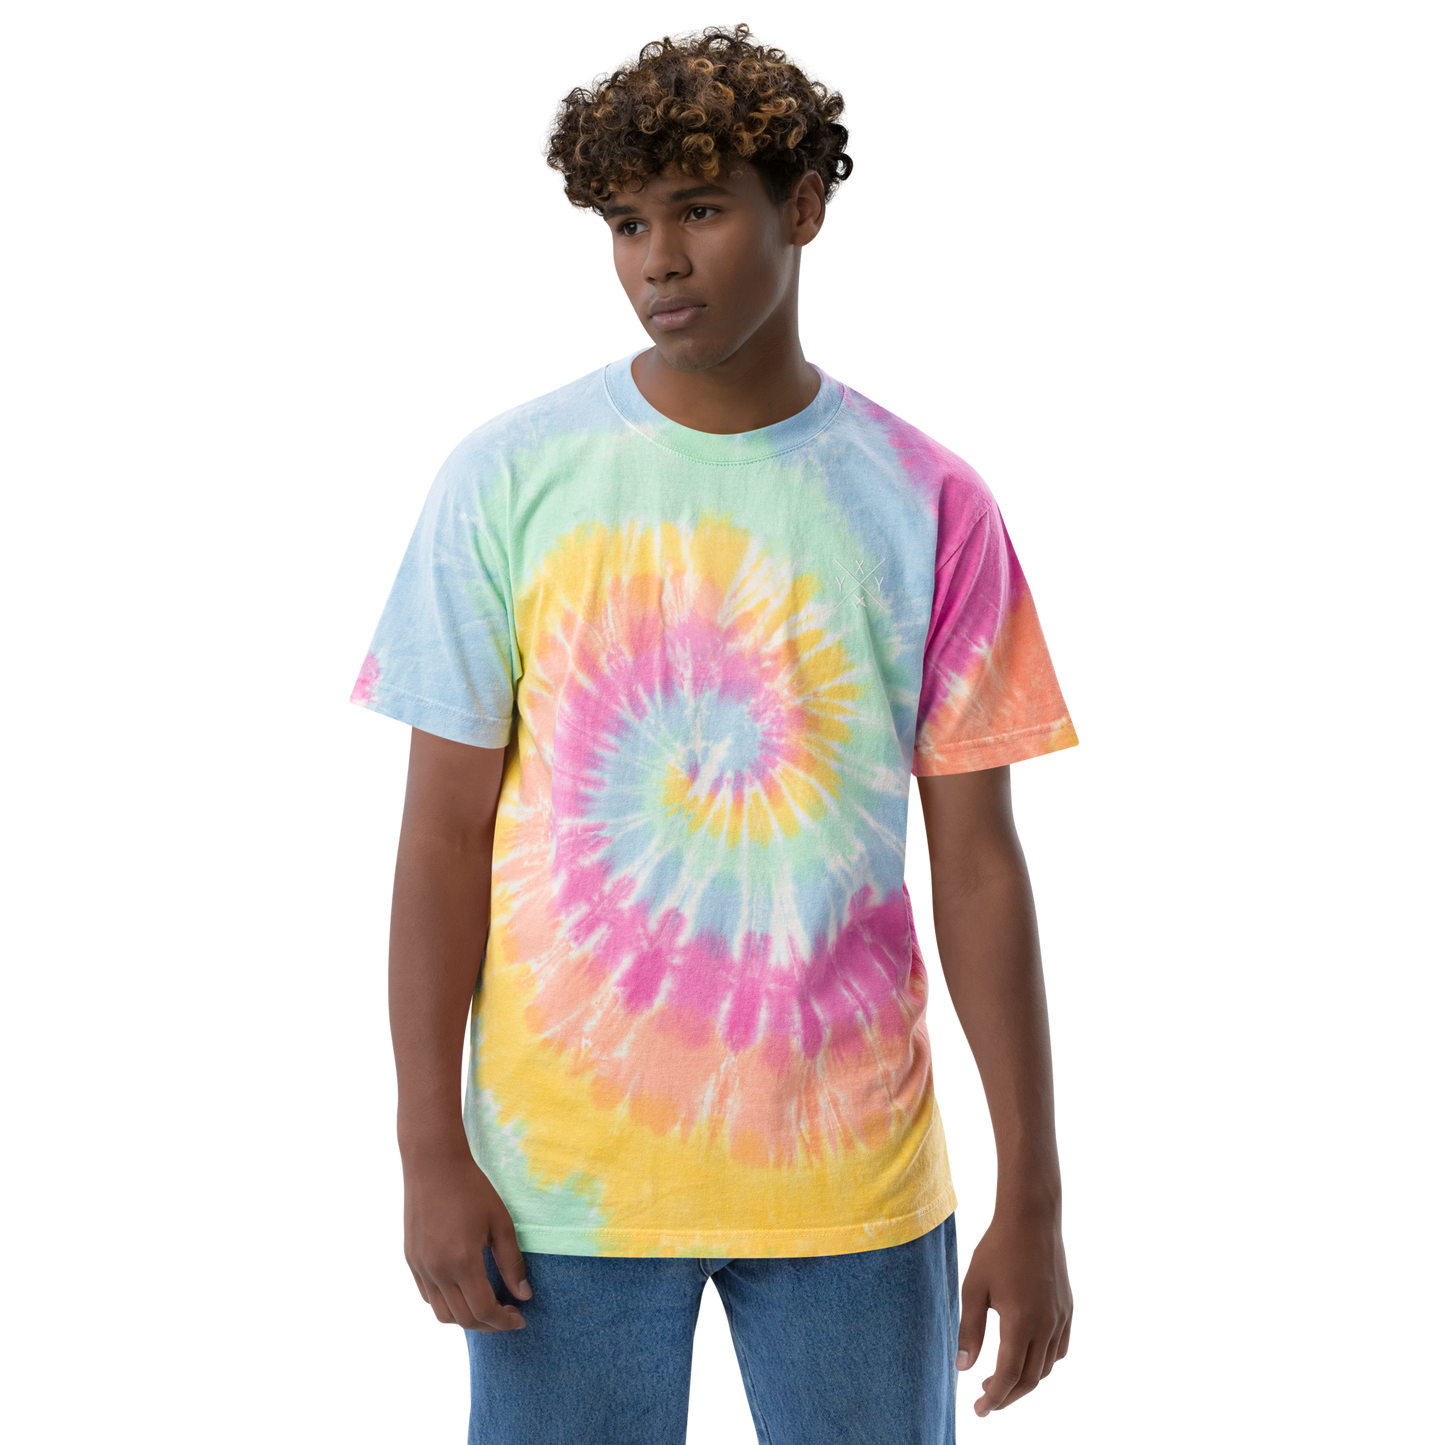 YHM Designs - YXY Whitehorse Oversized Tie-Dye T-Shirt - Crossed-X Design with Airport Code and Vintage Propliner - White Embroidery - Image 04